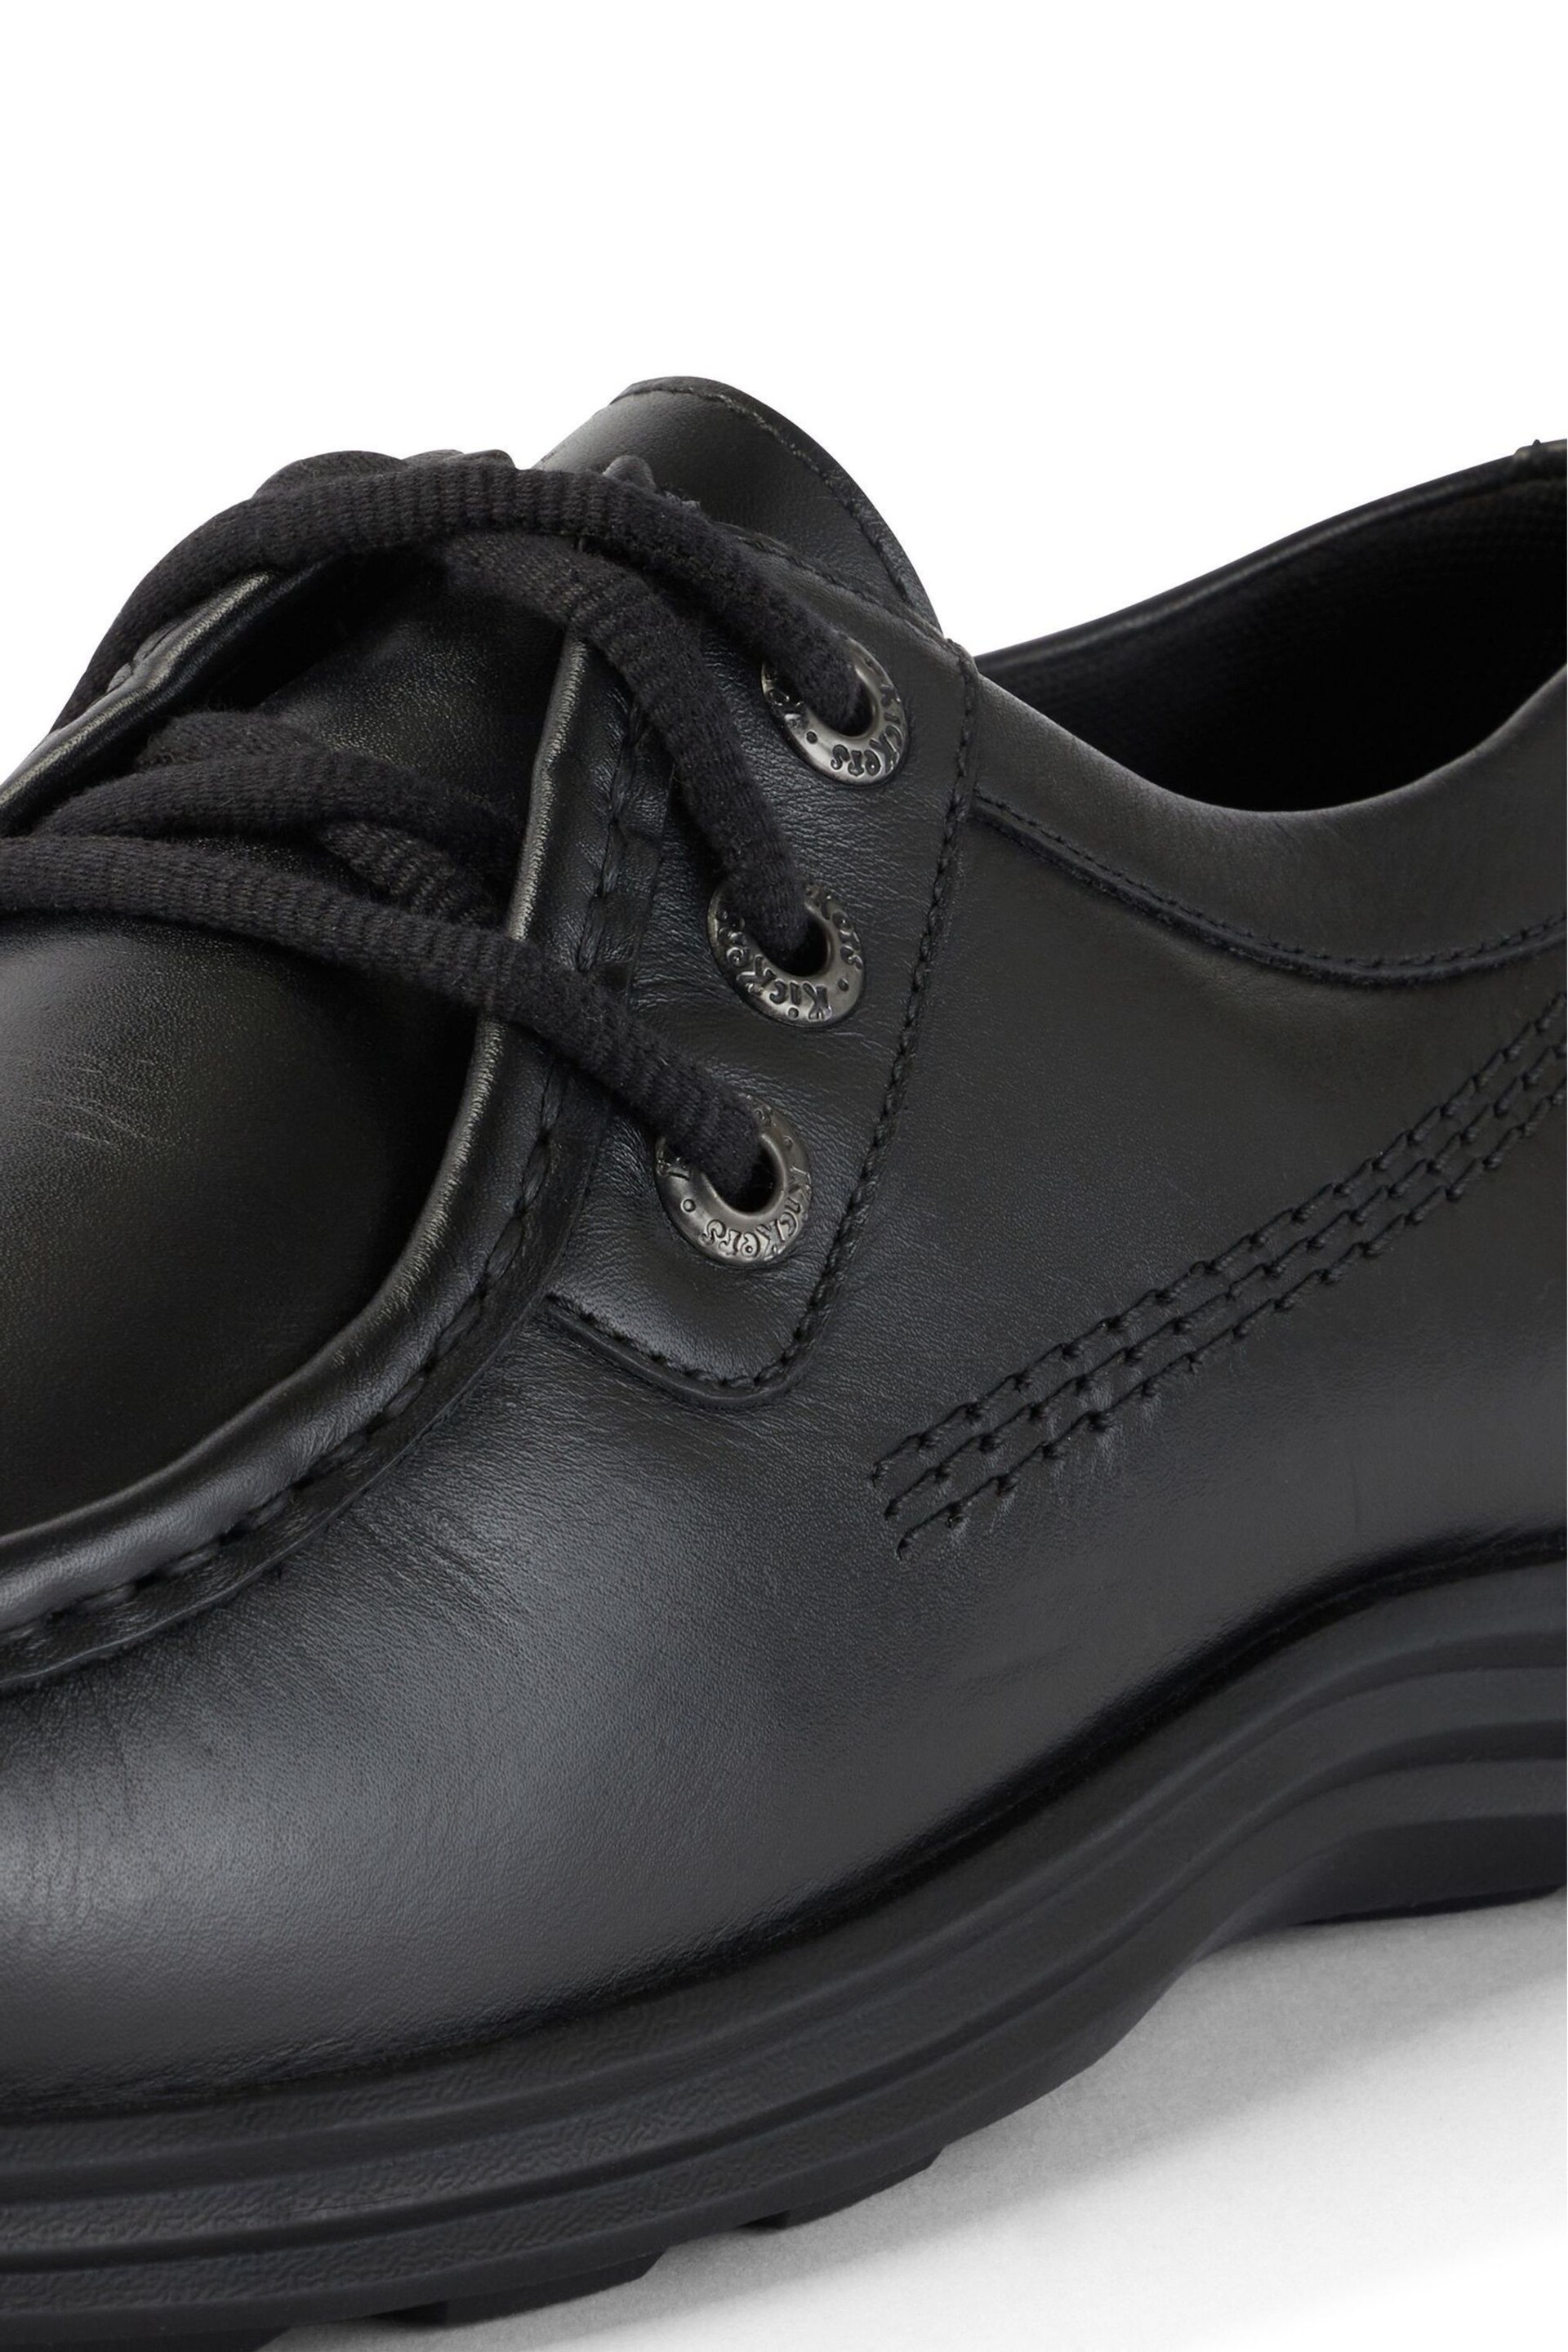 Kickers Reasan Mocc Leather Shoes - Image 6 of 6